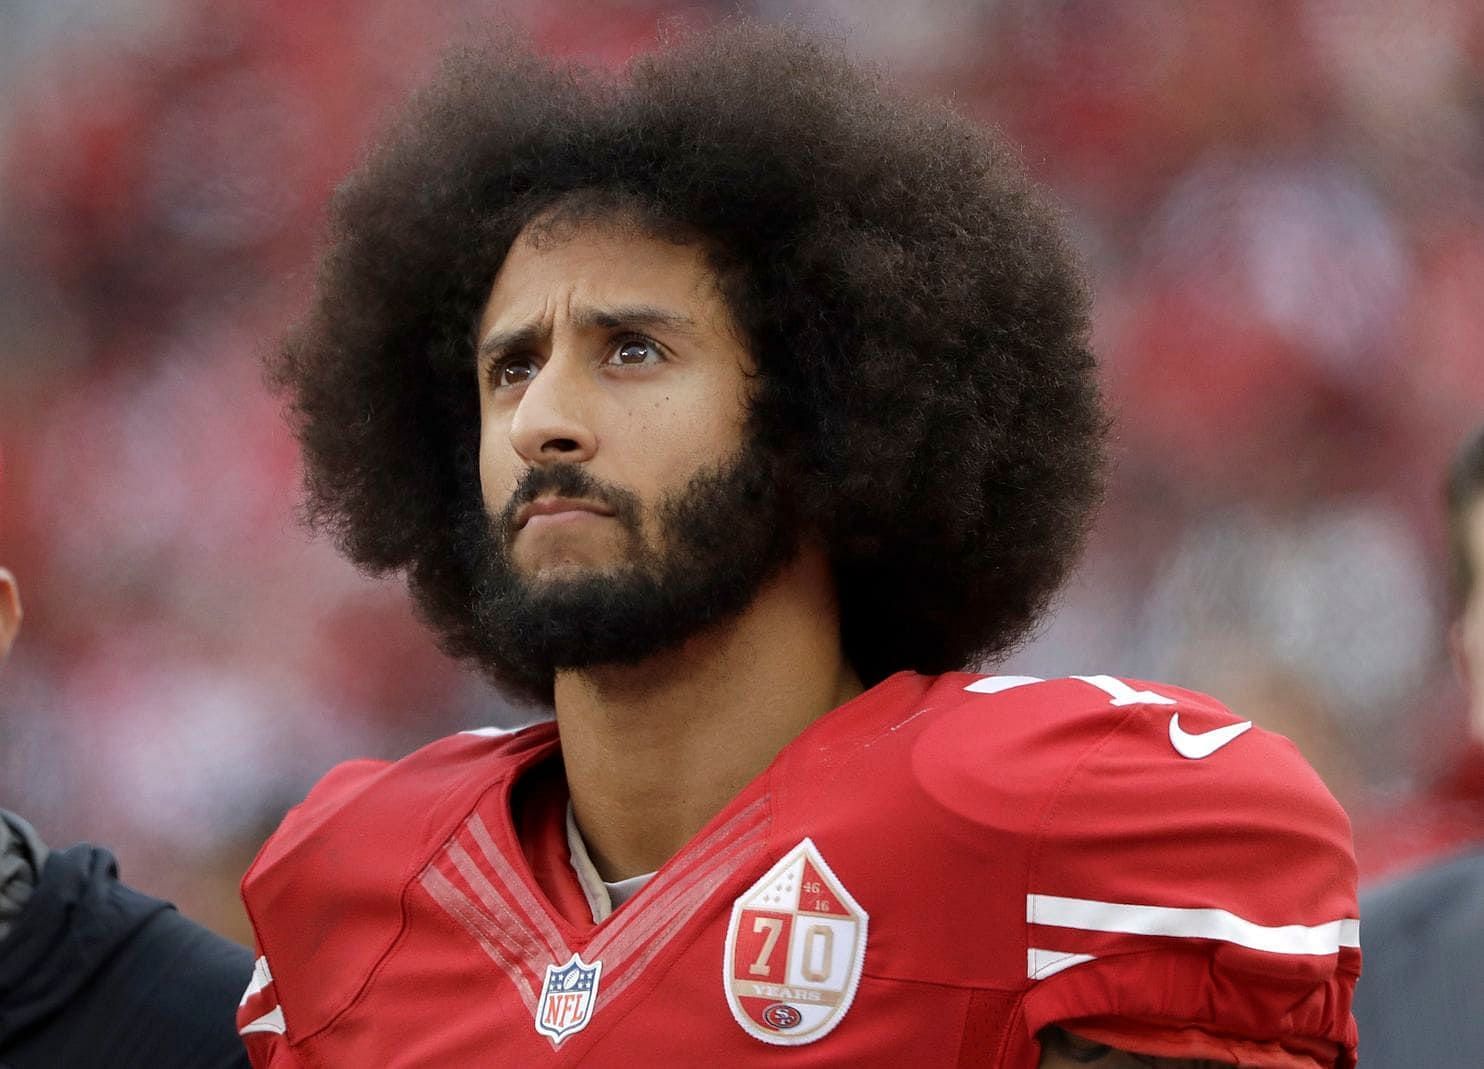 Free agent QB Colin Kaepernick is once again making moves to return to the NFL.